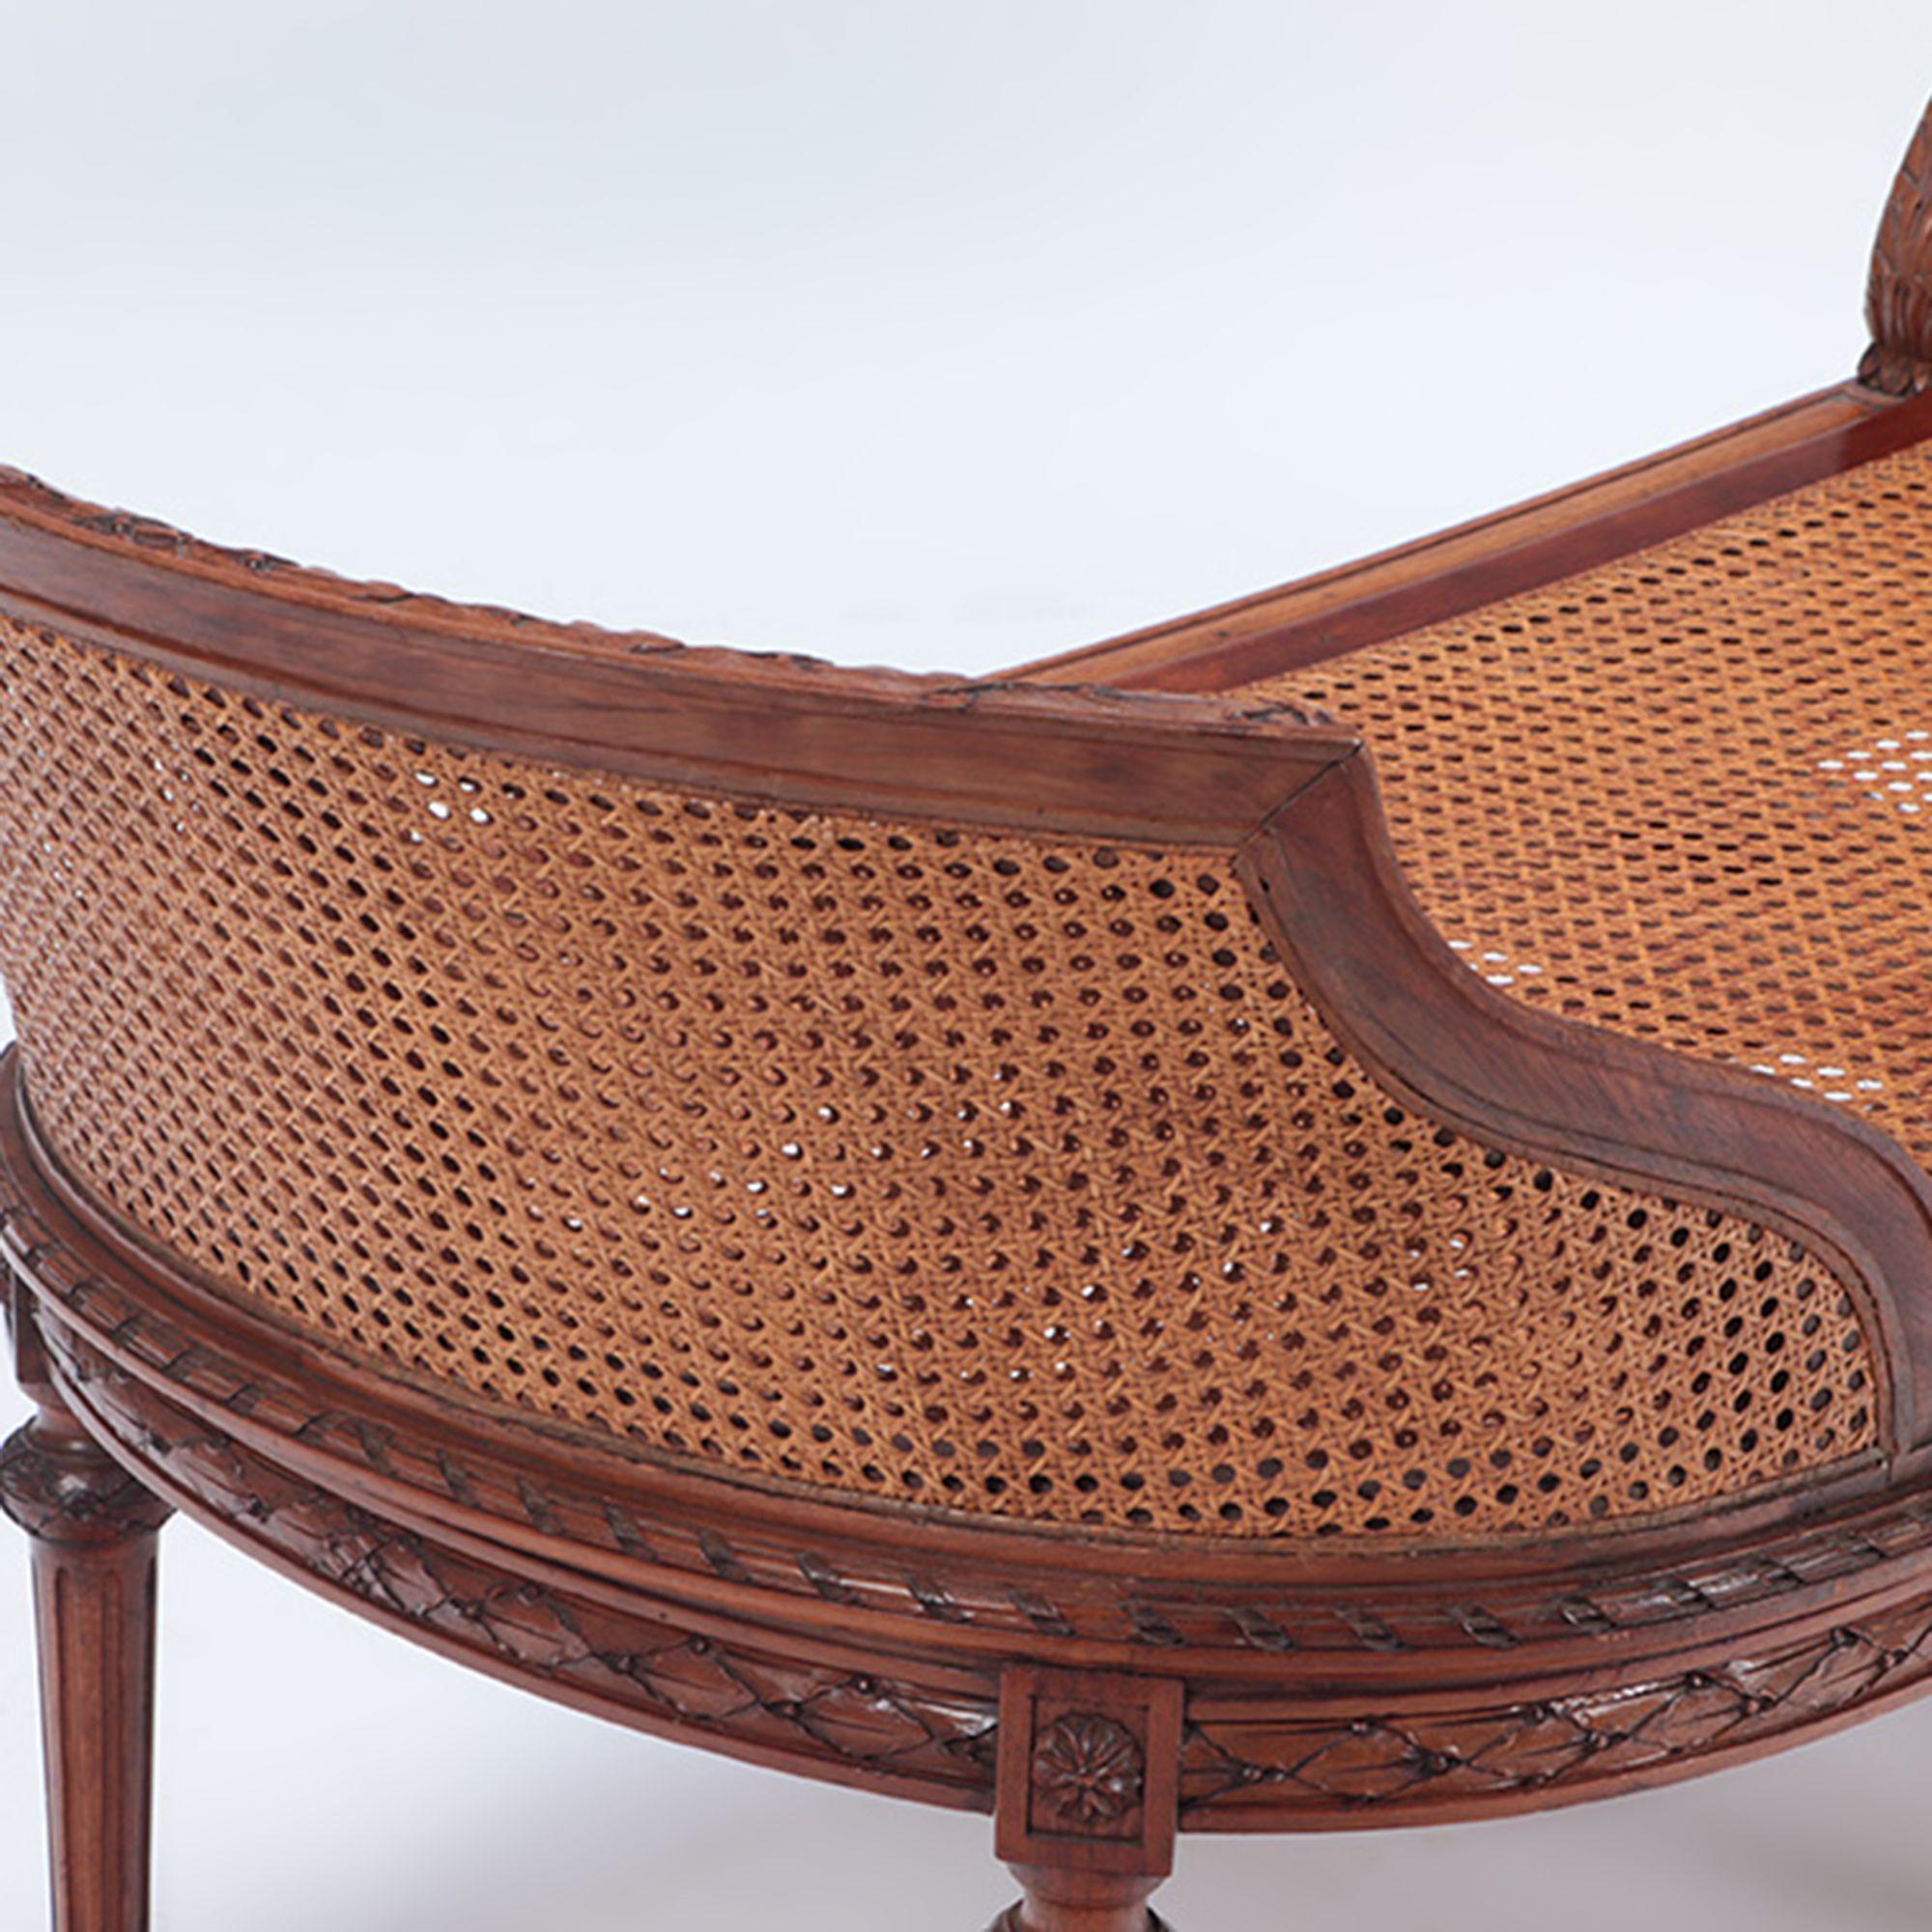 French Carved Walnut Chaise Lounge in the Louis XVI Style, circa 1900 For Sale 1